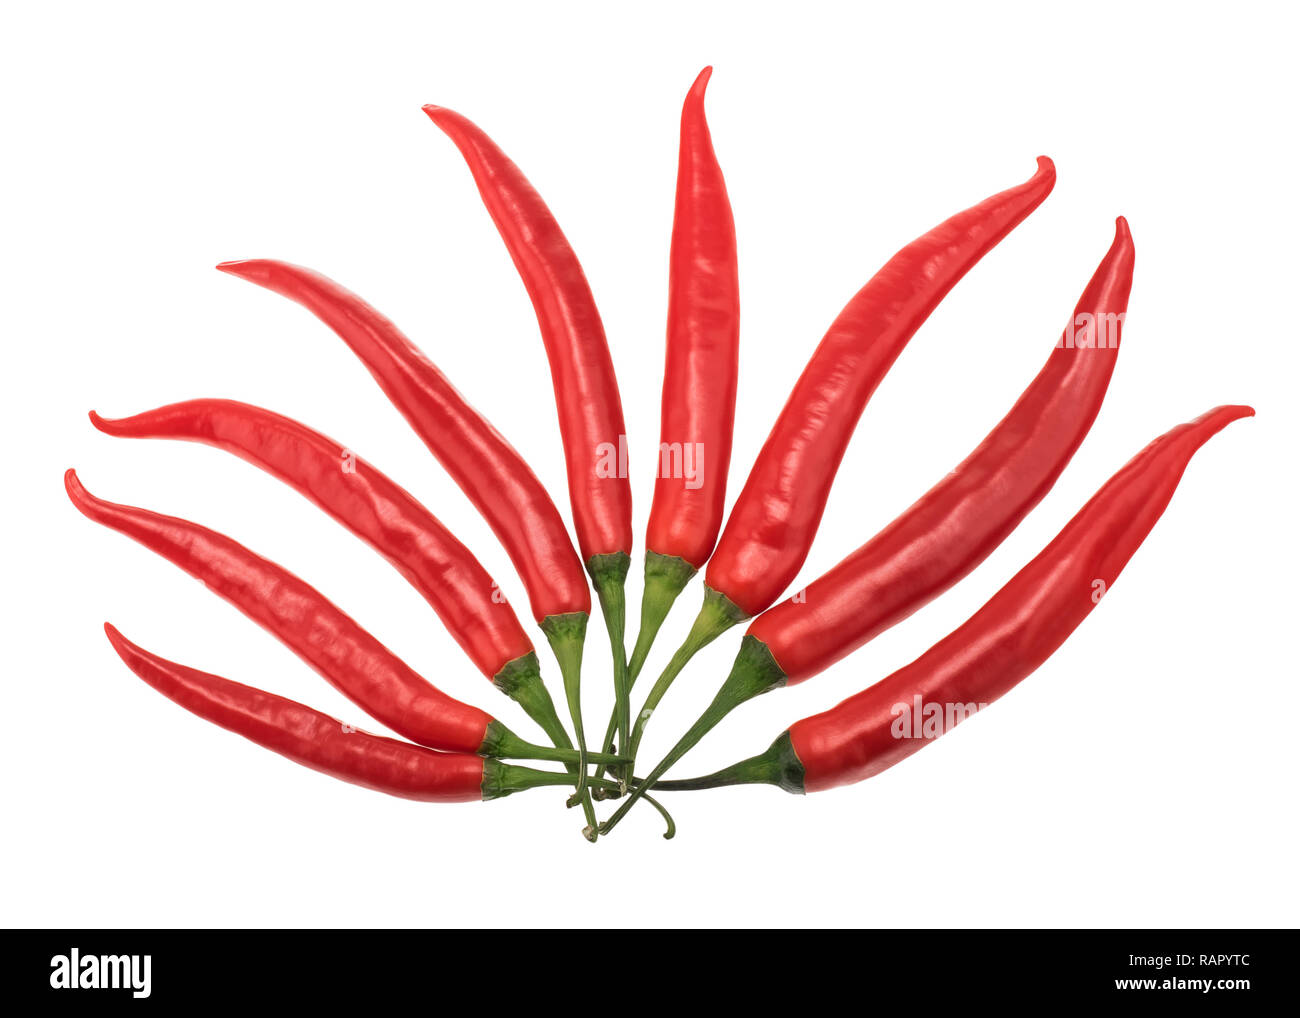 Chilli peppers, fanned out, isolated over white Stock Photo